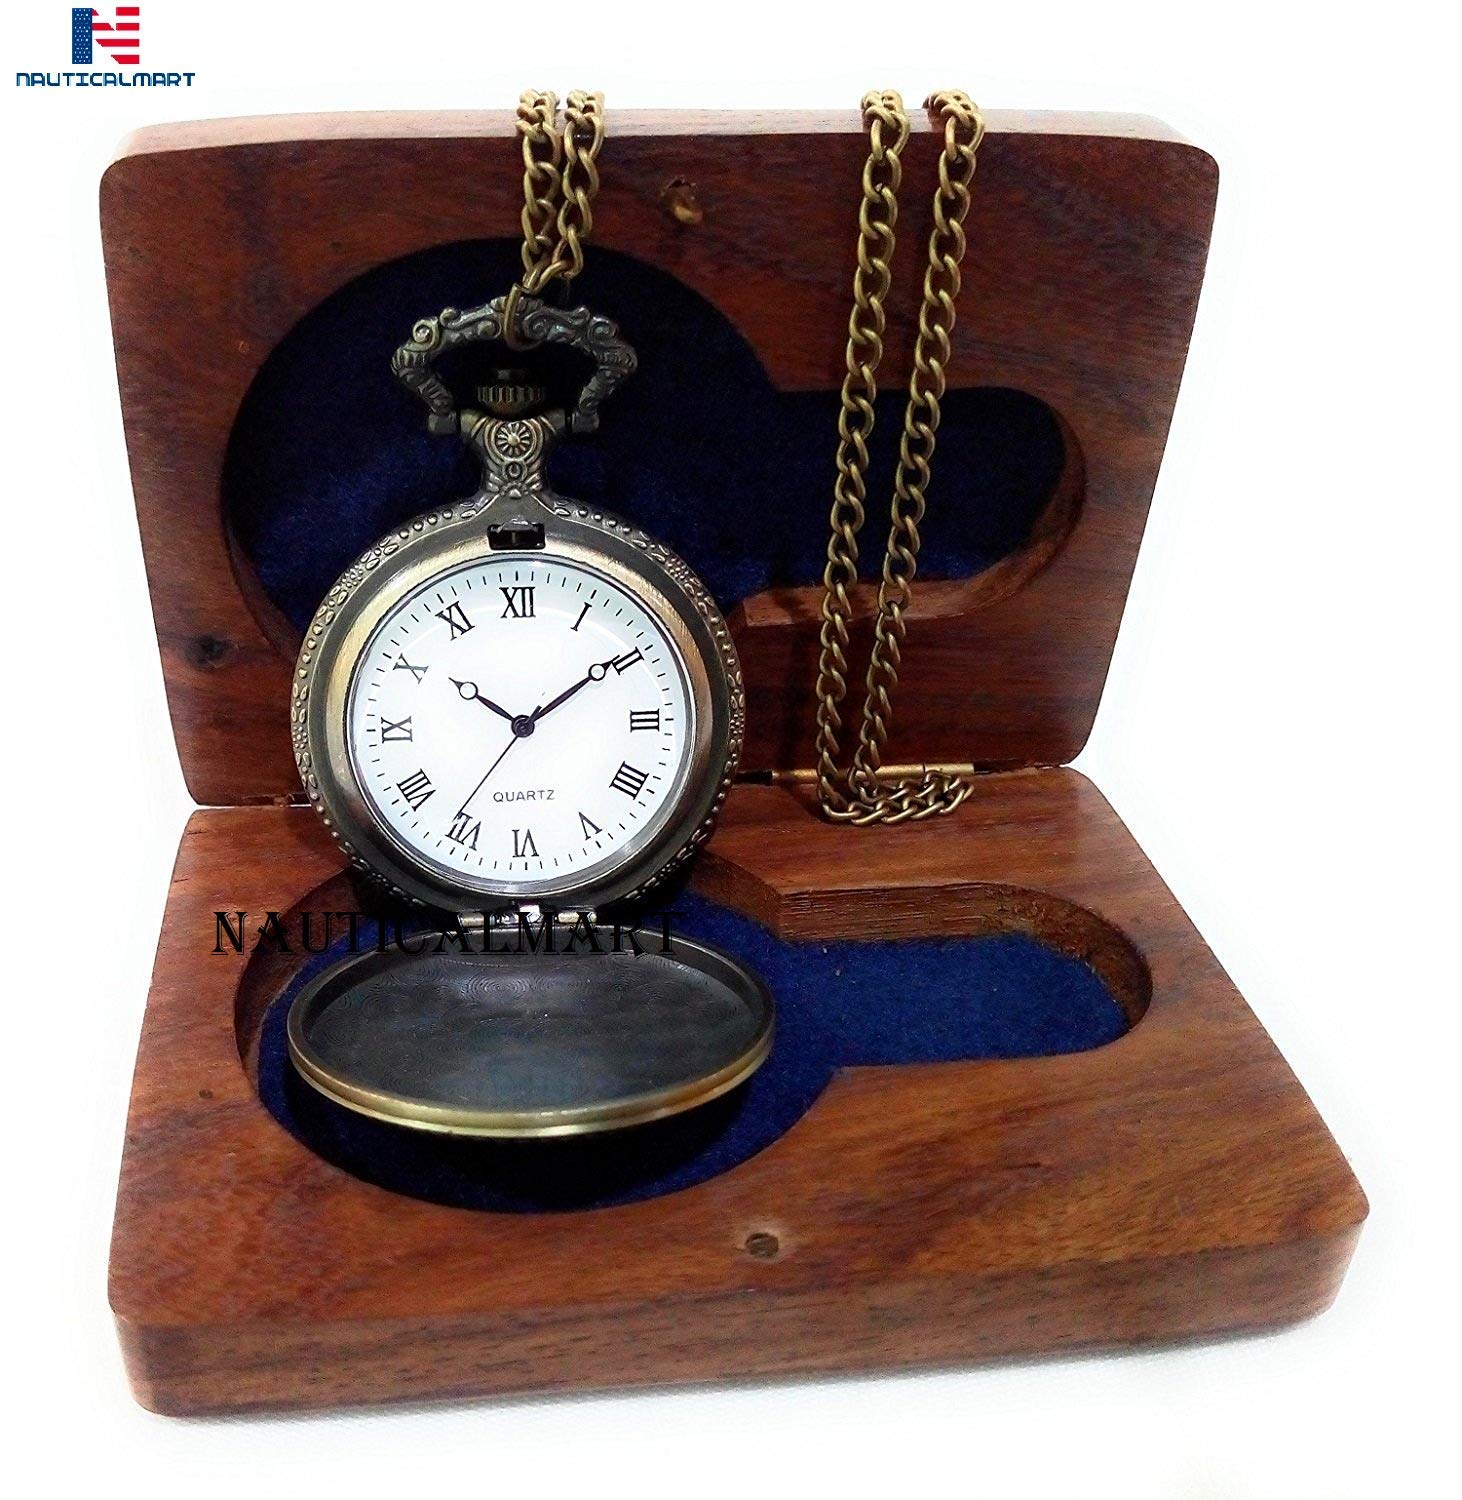 NauticalMart Embossed with Flower, Roman Number Dial Analogue White Dial Pocket Watch with Chain and Wooden Box